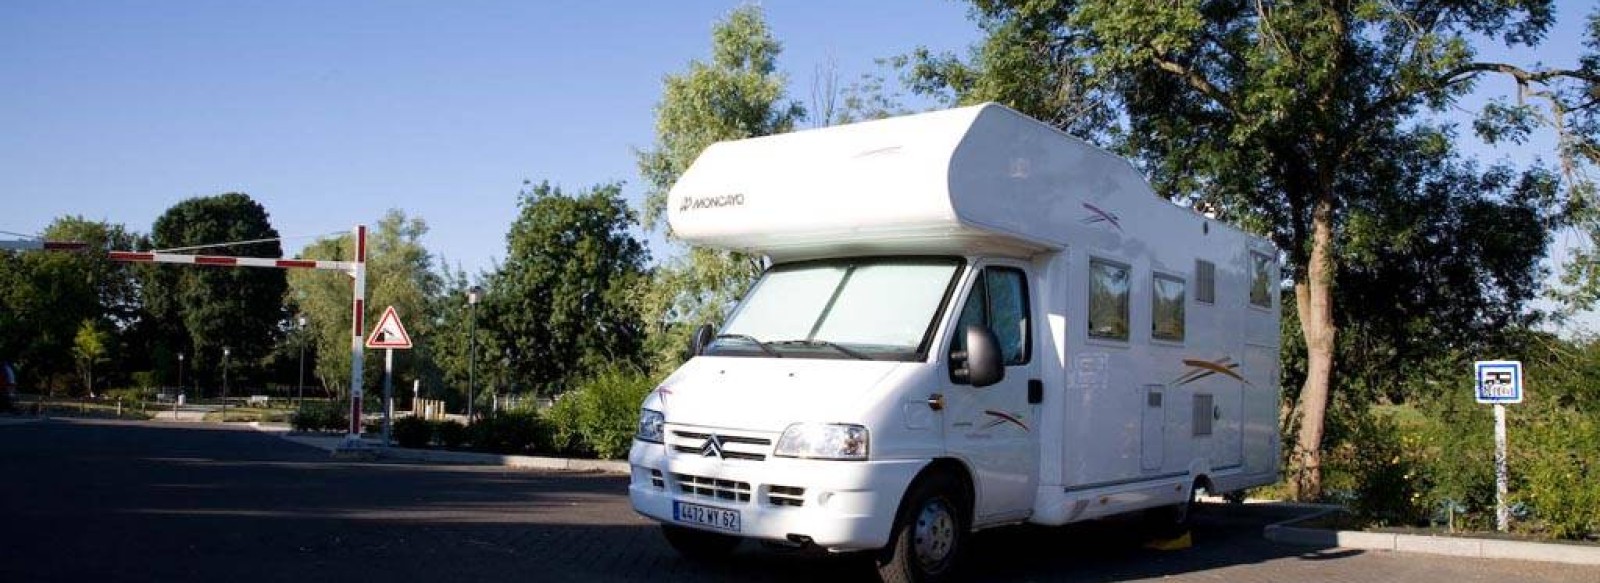 Aire de camping-cars d'Arnage